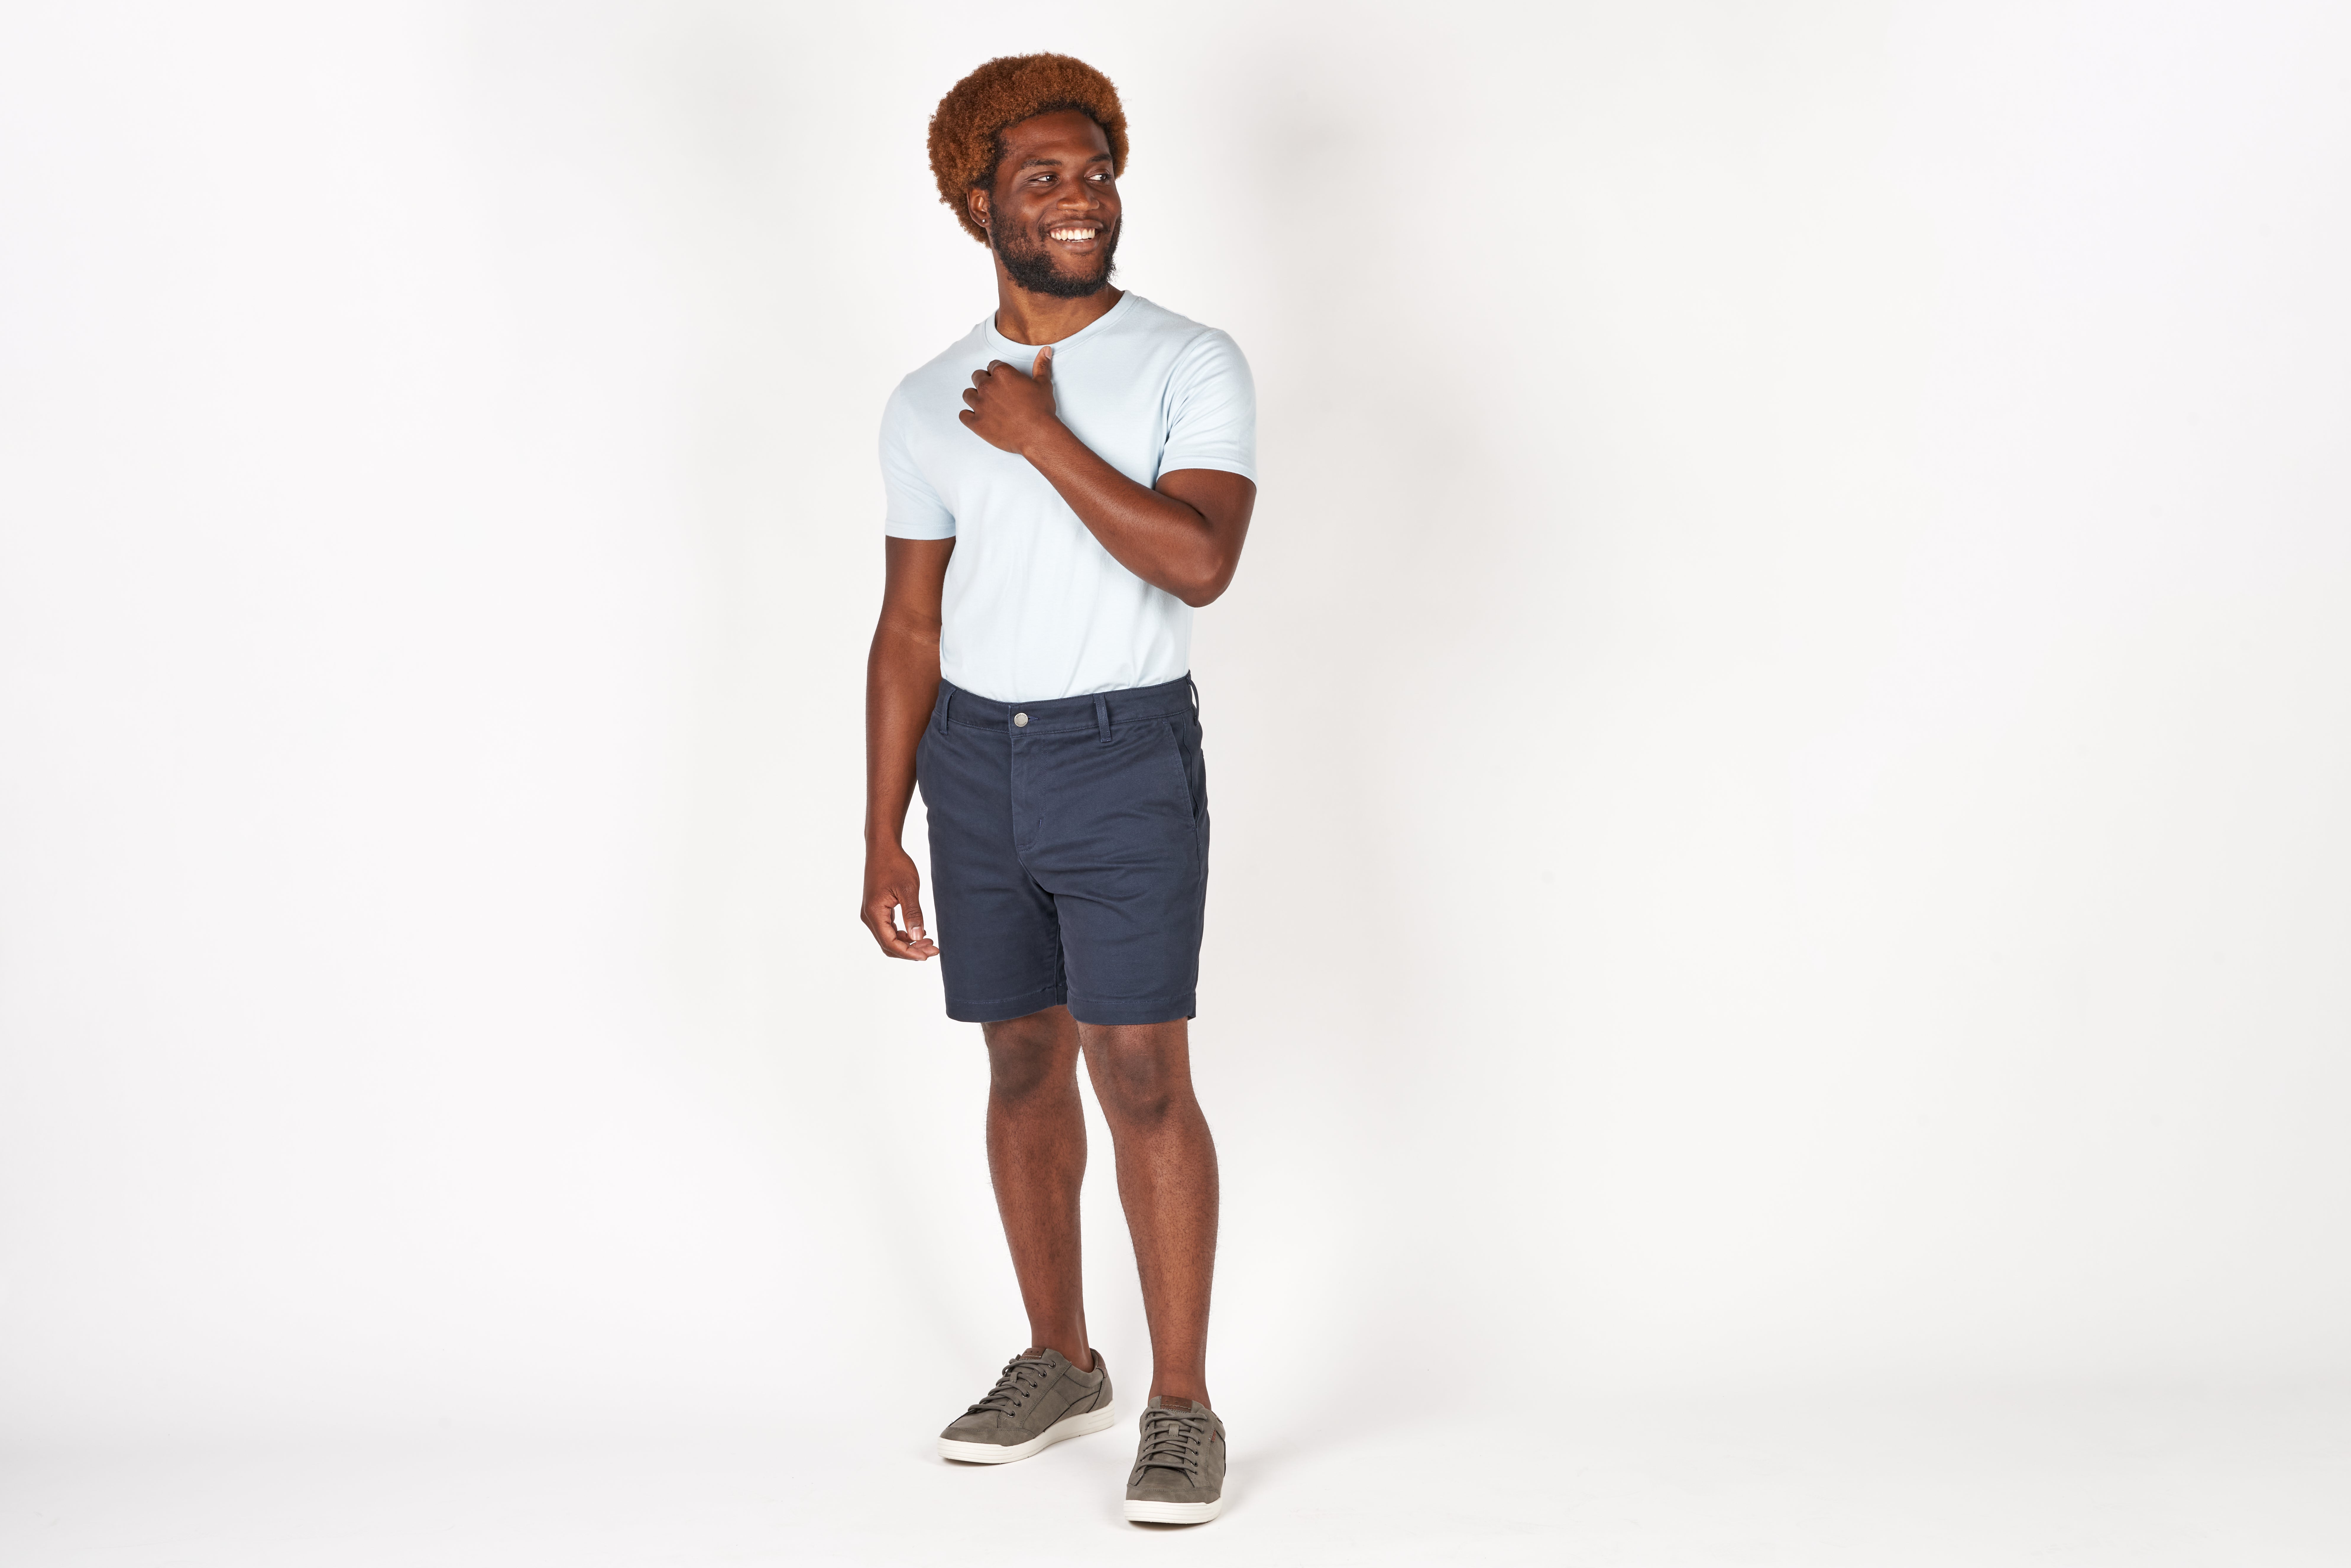 Stylish and Trendy Short Shorts for a Fashionable Look